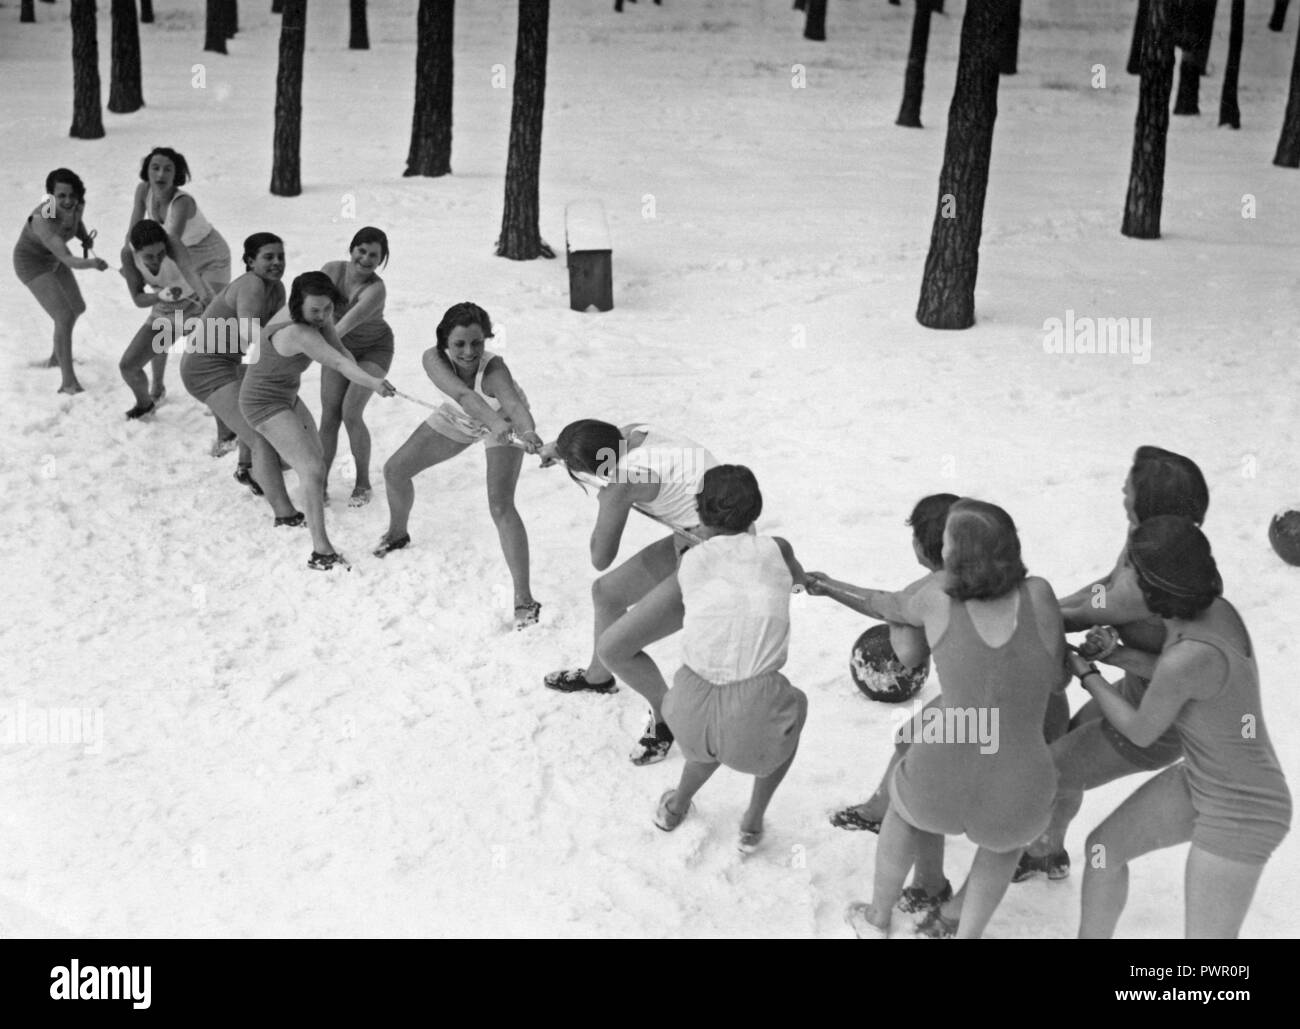 Tug of war wintertime.  Two teams of women in bathingsuits are having a tug of war in the snow. 1930s Stock Photo